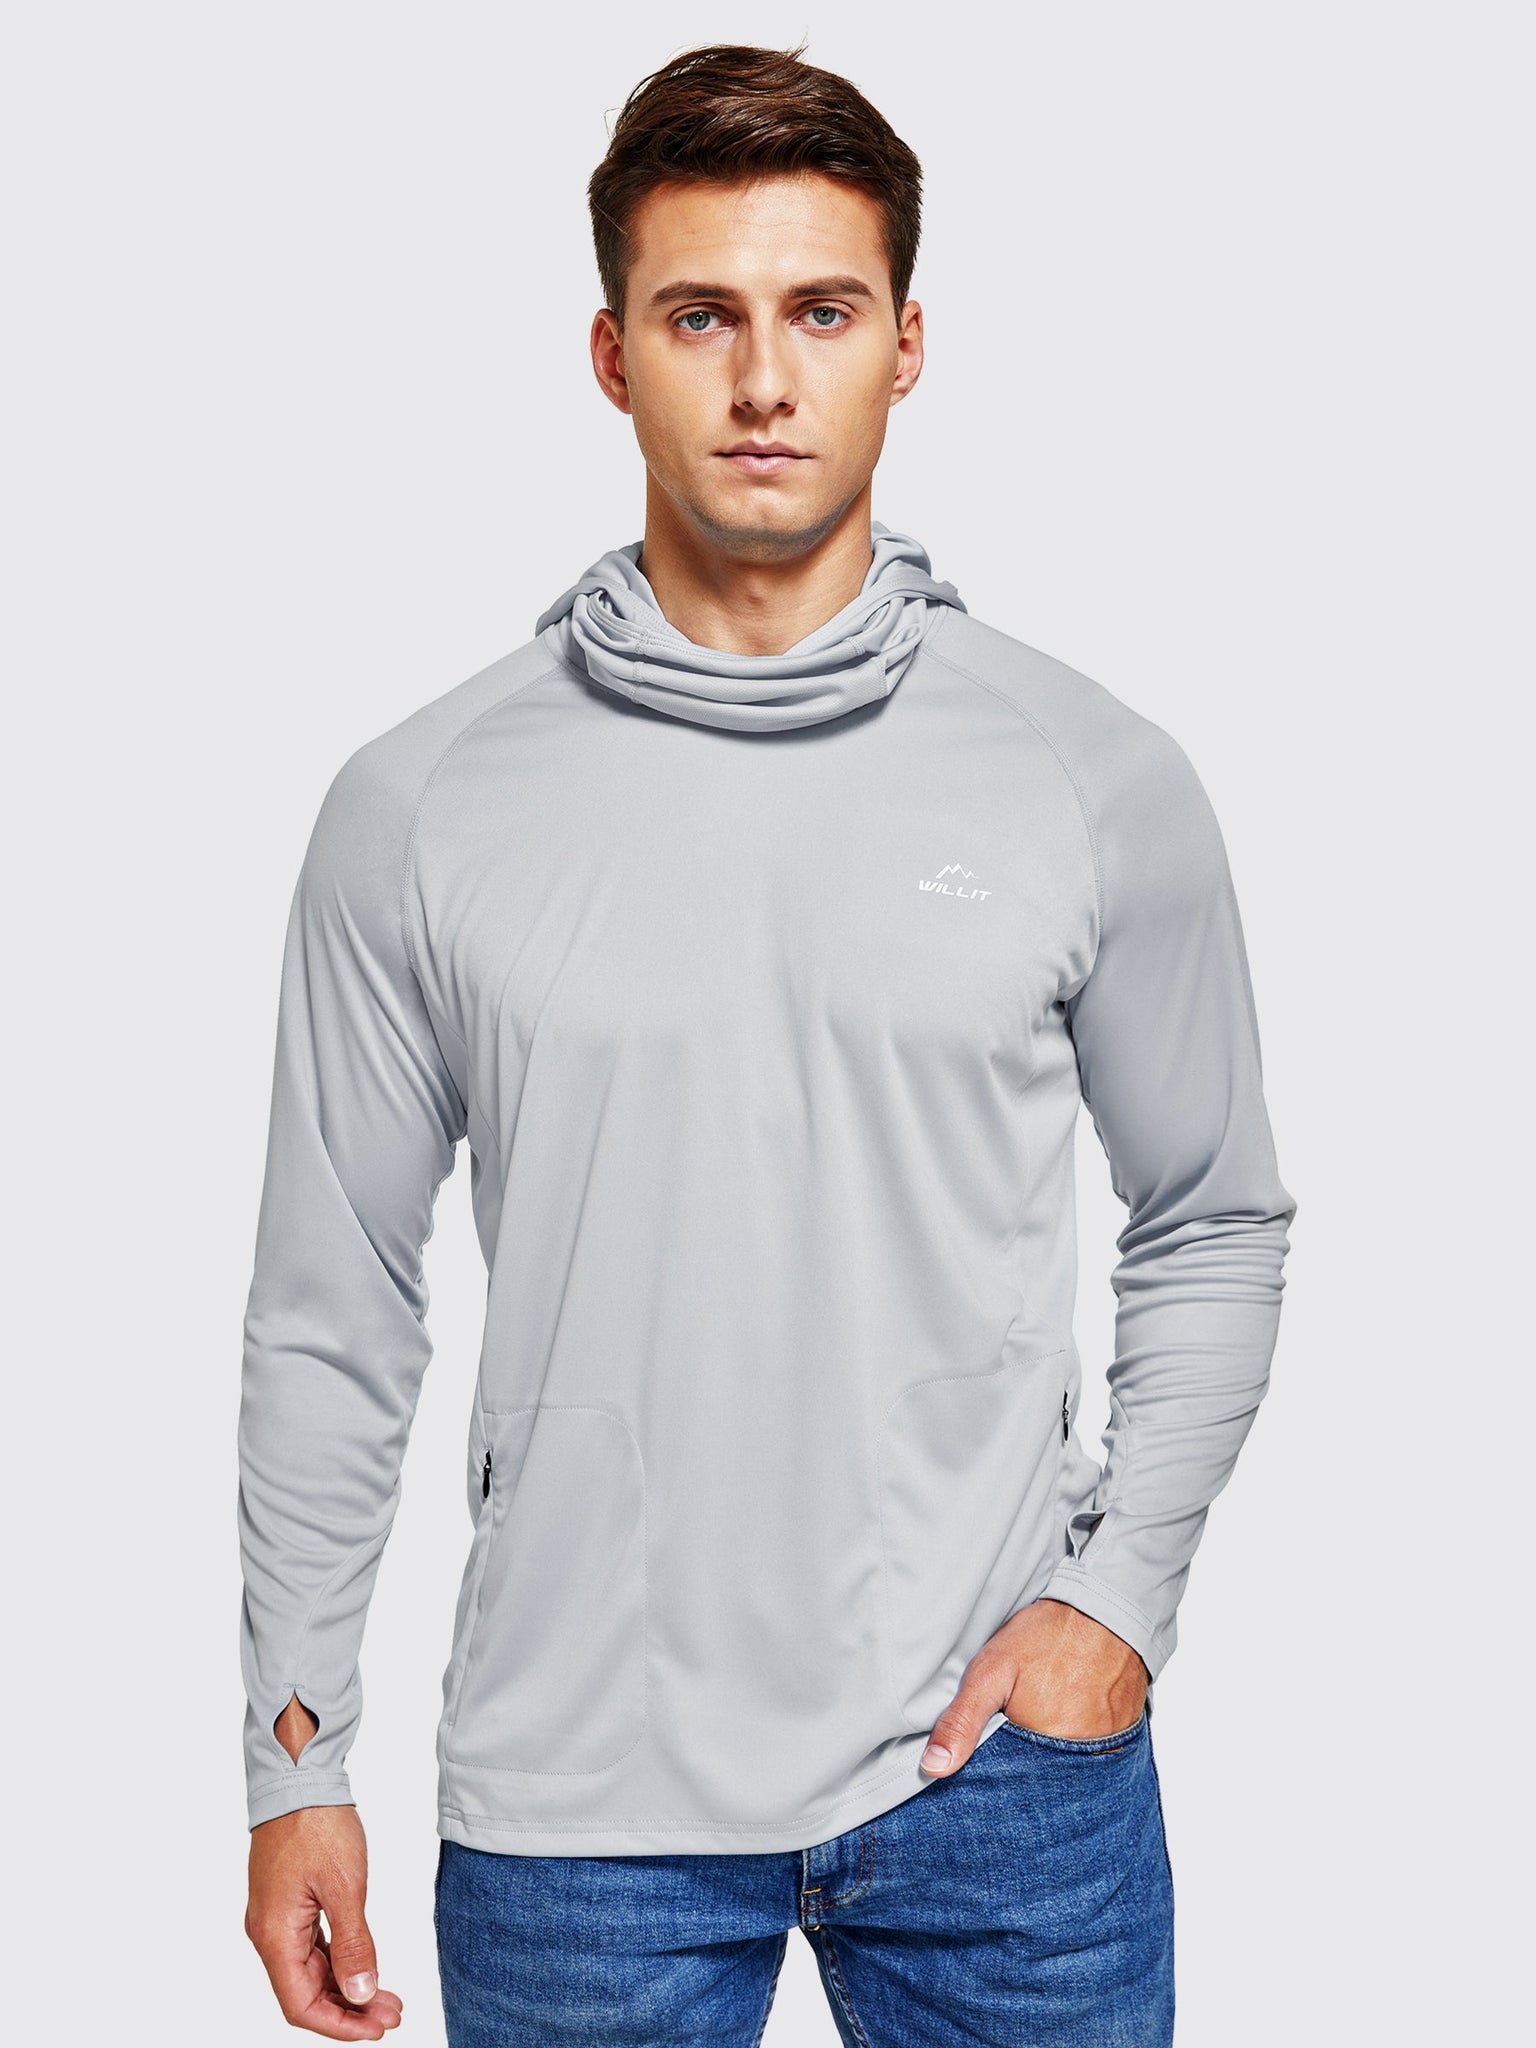 Sun Protection Mens Hoodie: Quick Dry, Lightweight, And UV Protective T  Shirt For Outdoor Activities And Workout From B121144507, $10.26